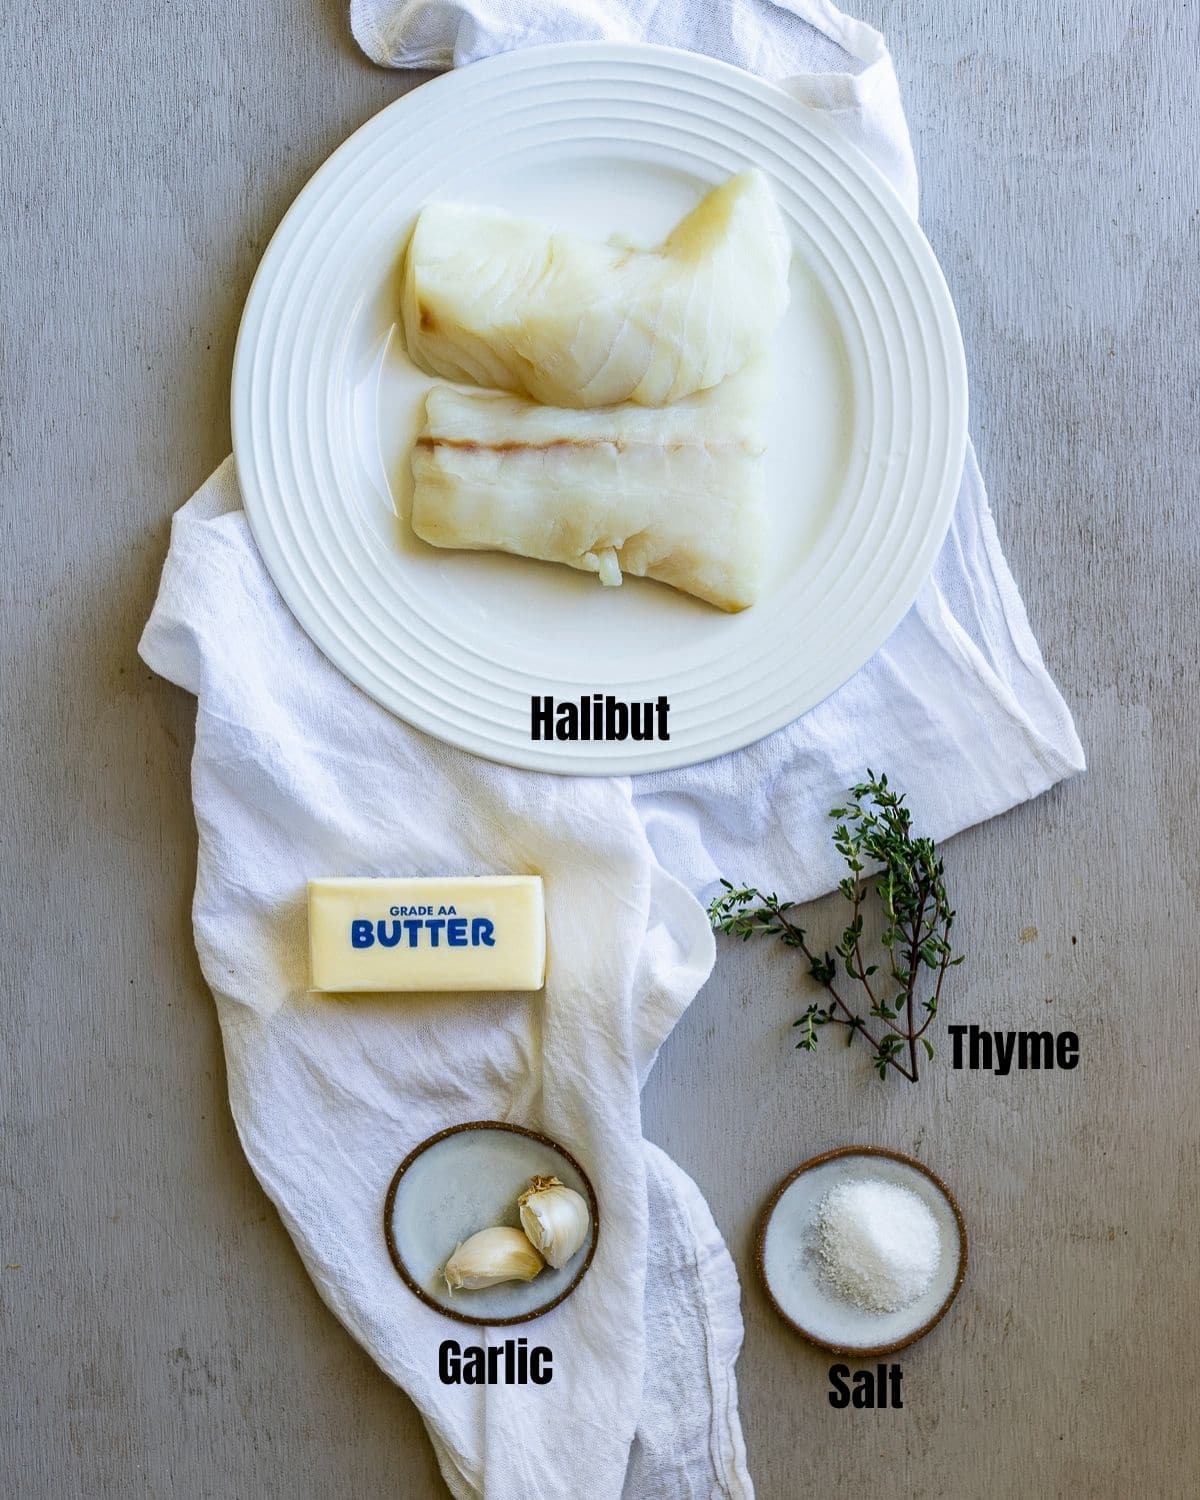 Ingredients to make sous vide halibut arranged individually and labelled.